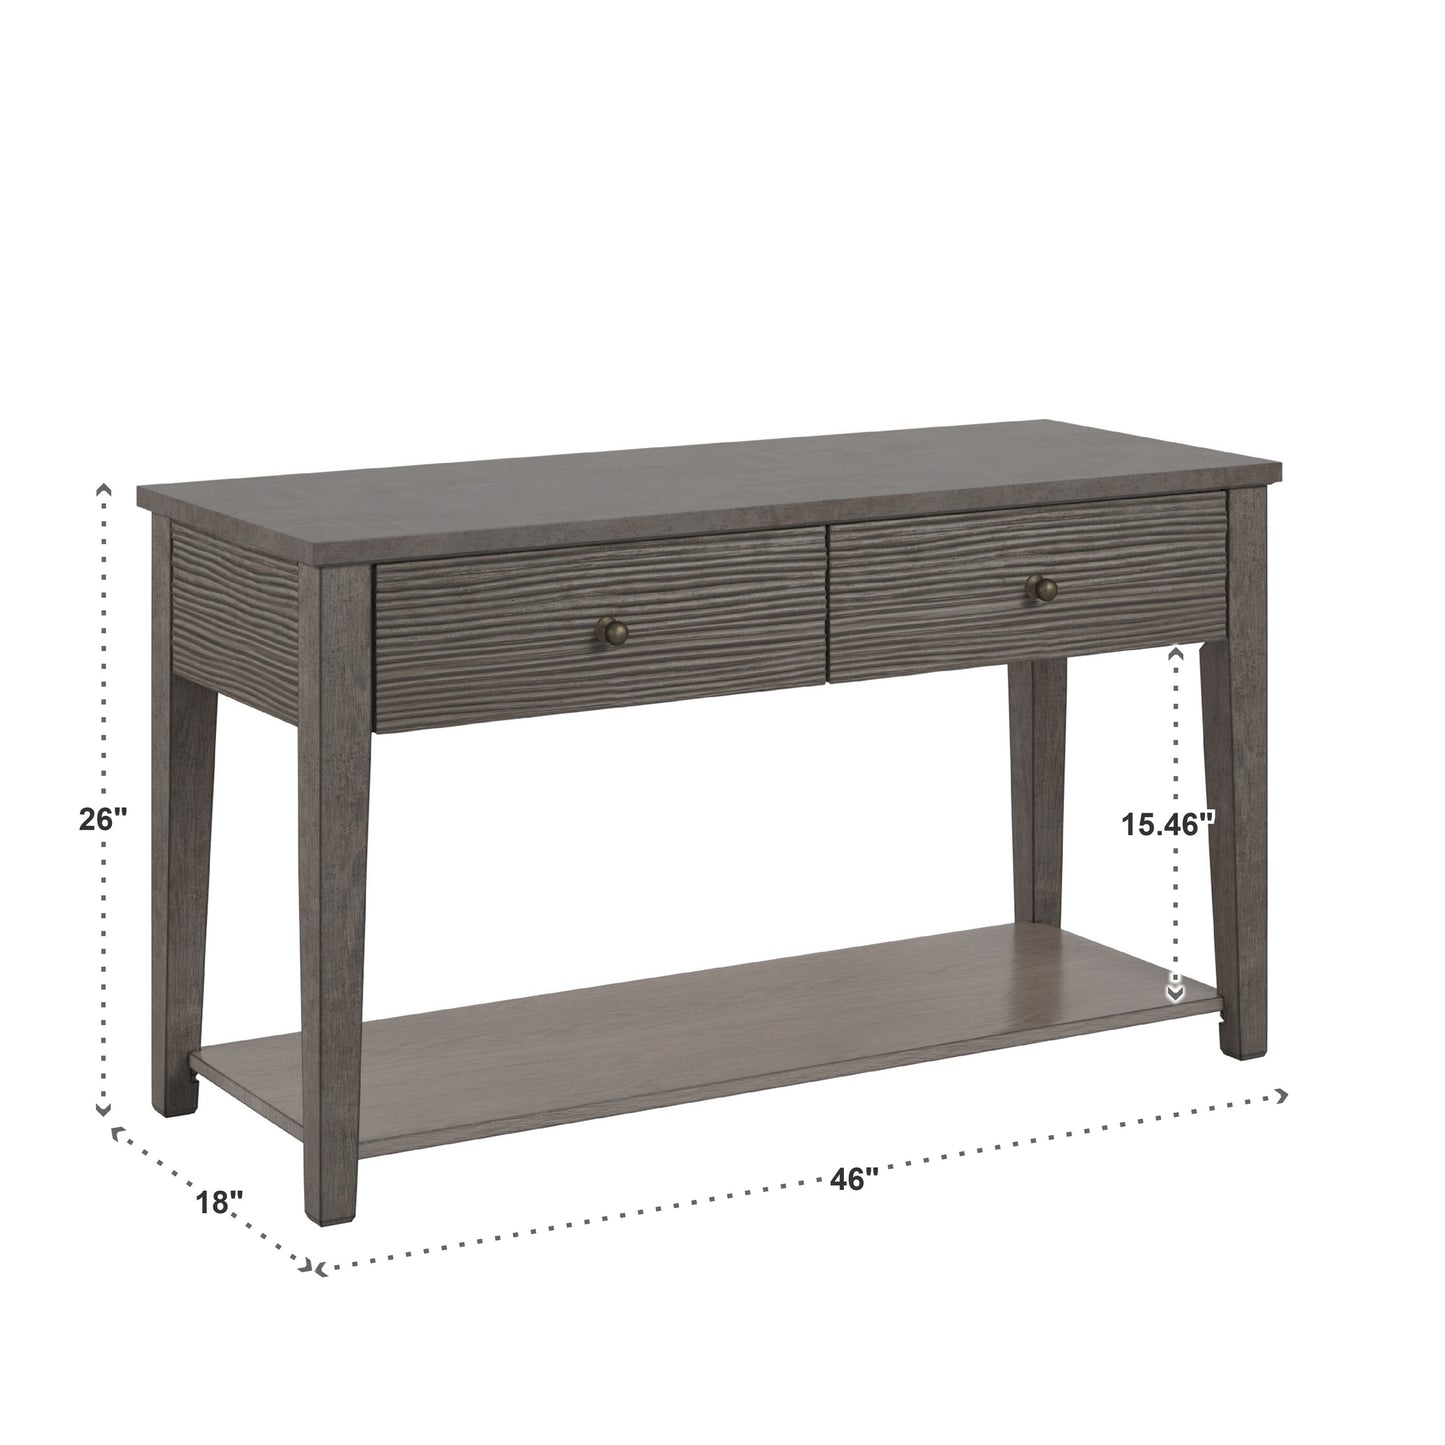 Antique Grey Finish Grey Fiber Cement Table with Self - Sofa Table